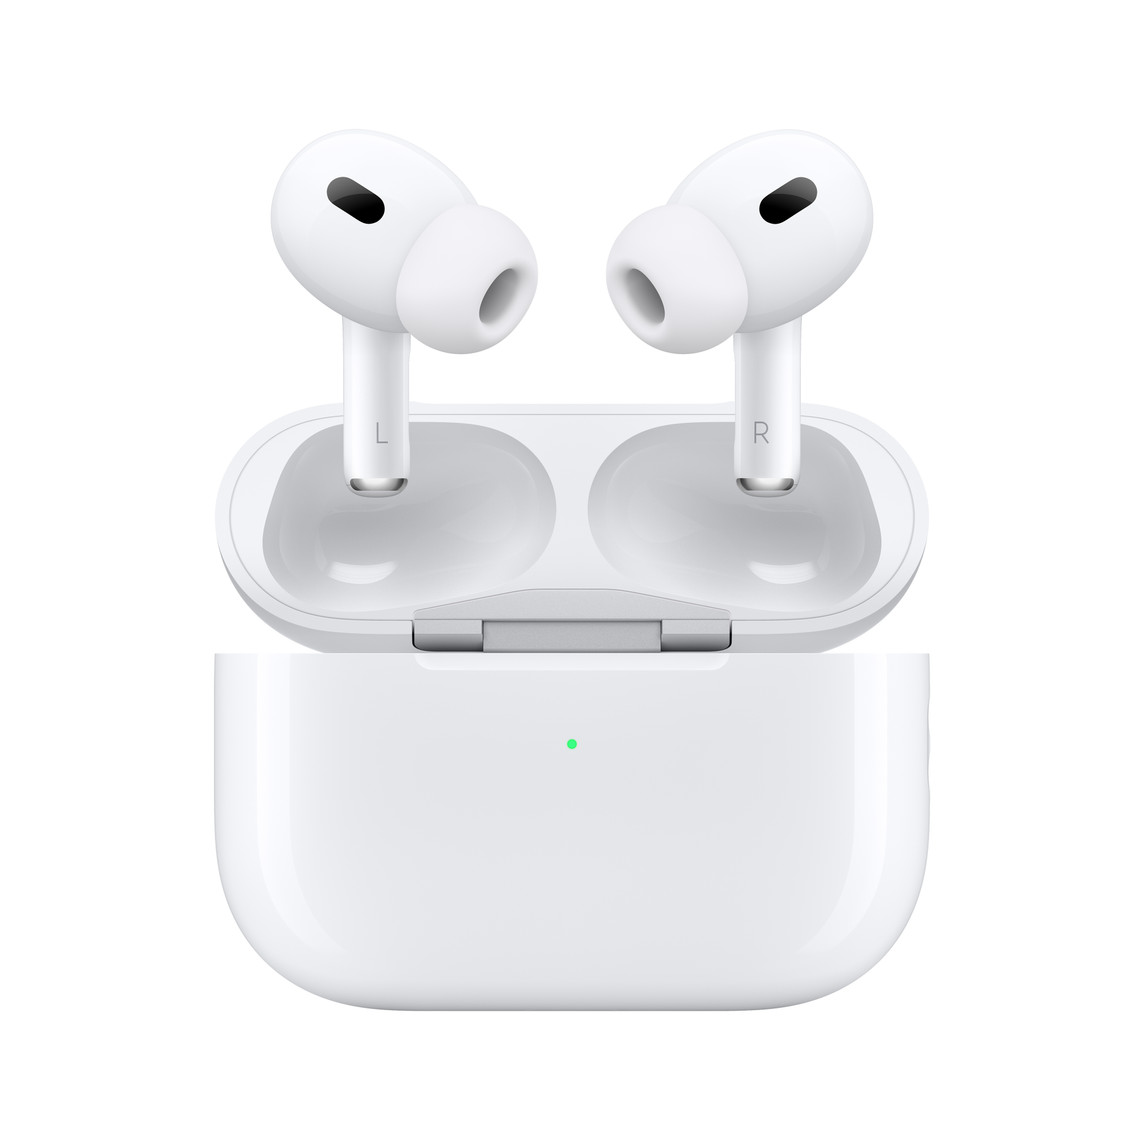 How to Adjust Microphone Position on AirPods Pro 19